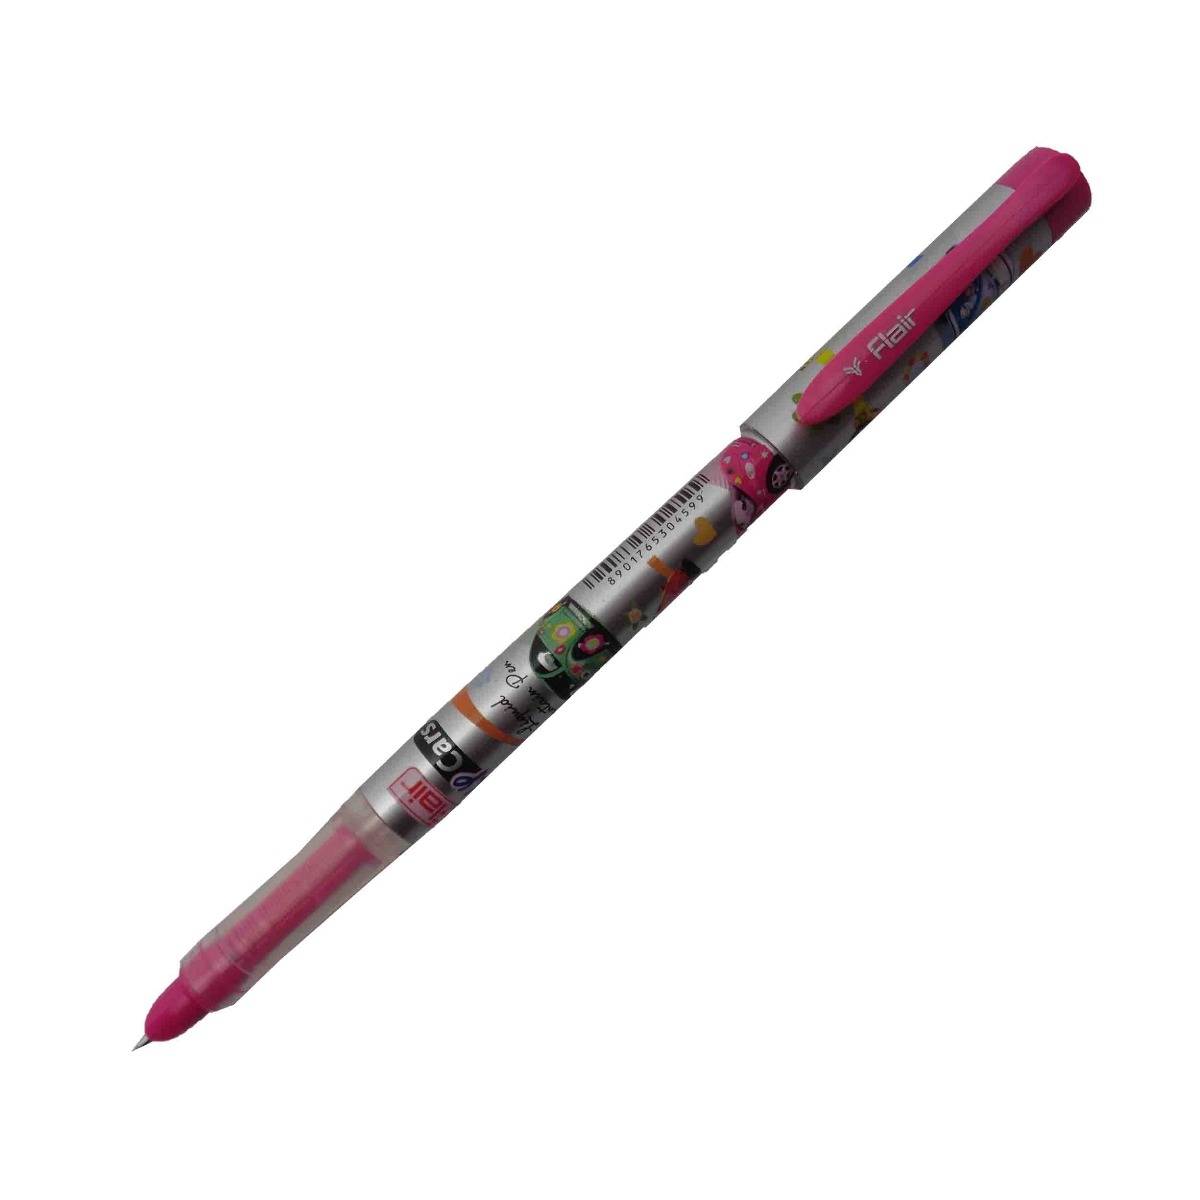 Flair Inky cars Model 15355 Grey color design body with Pink clip fine tip with 2 ink cartridge cap type fountain pen